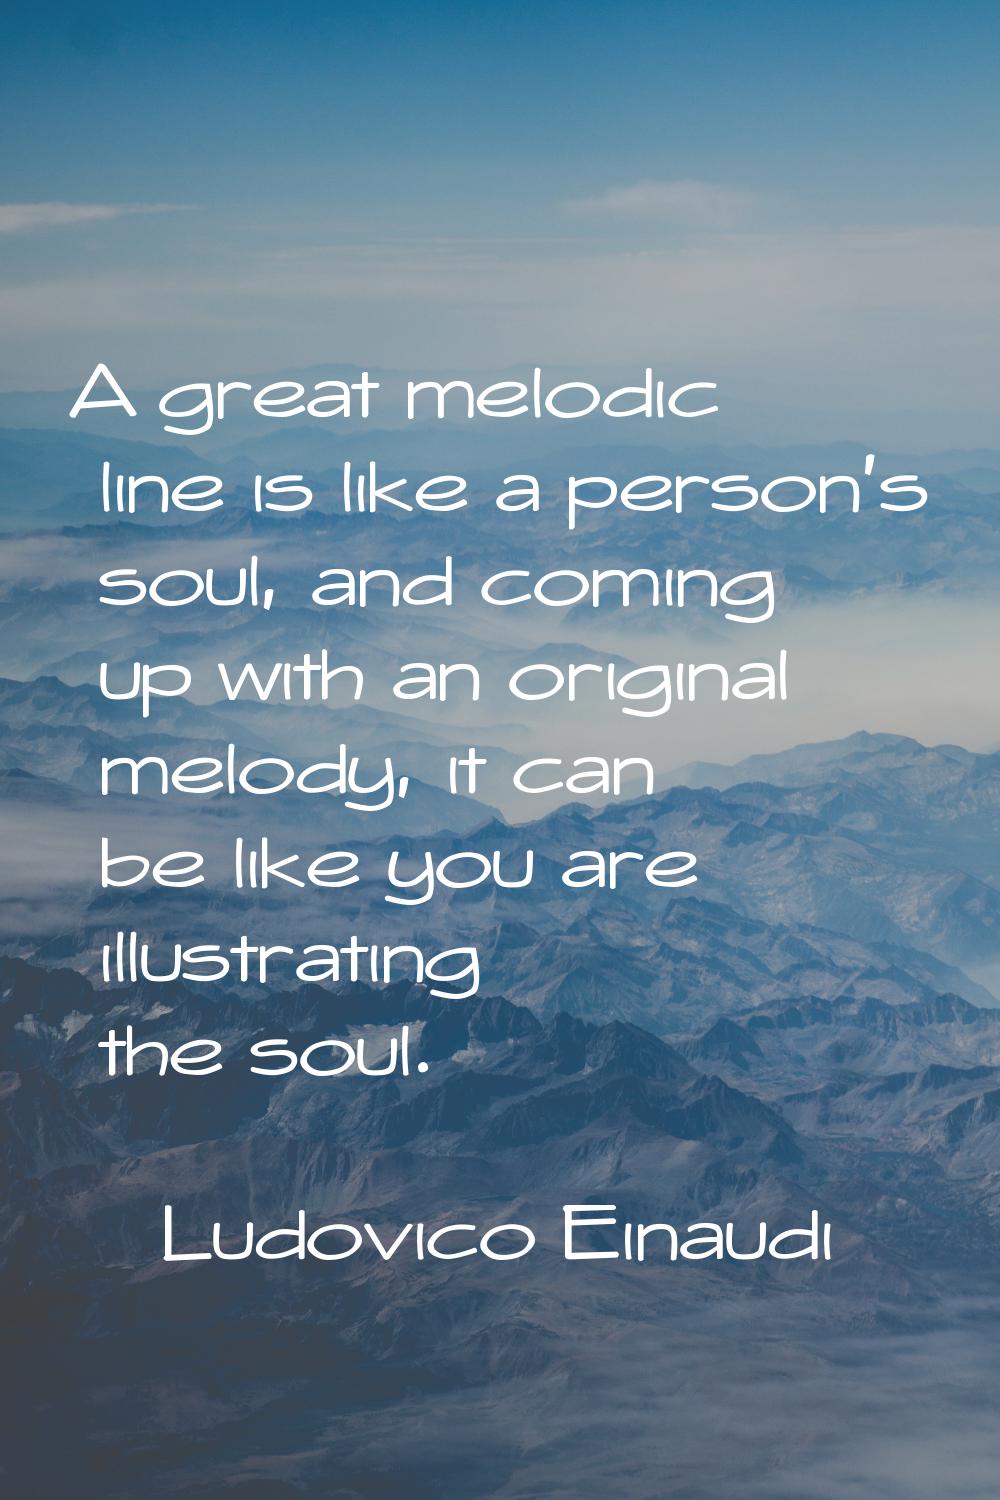 A great melodic line is like a person's soul, and coming up with an original melody, it can be like